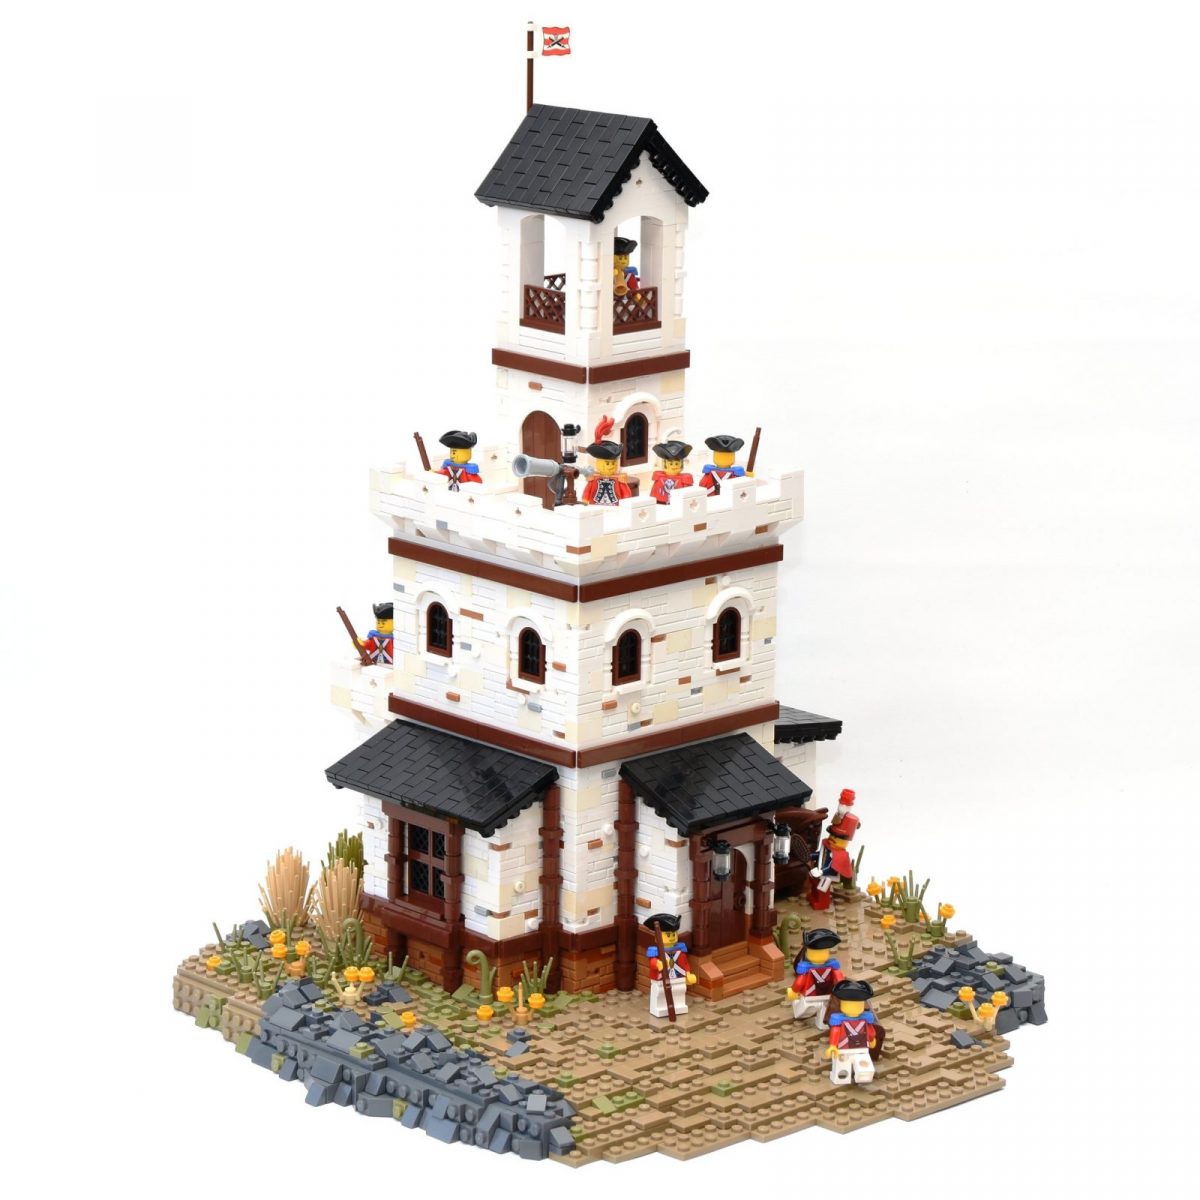 Featured Image for "Customs Post, Hussar's Isle" by Ayrlego